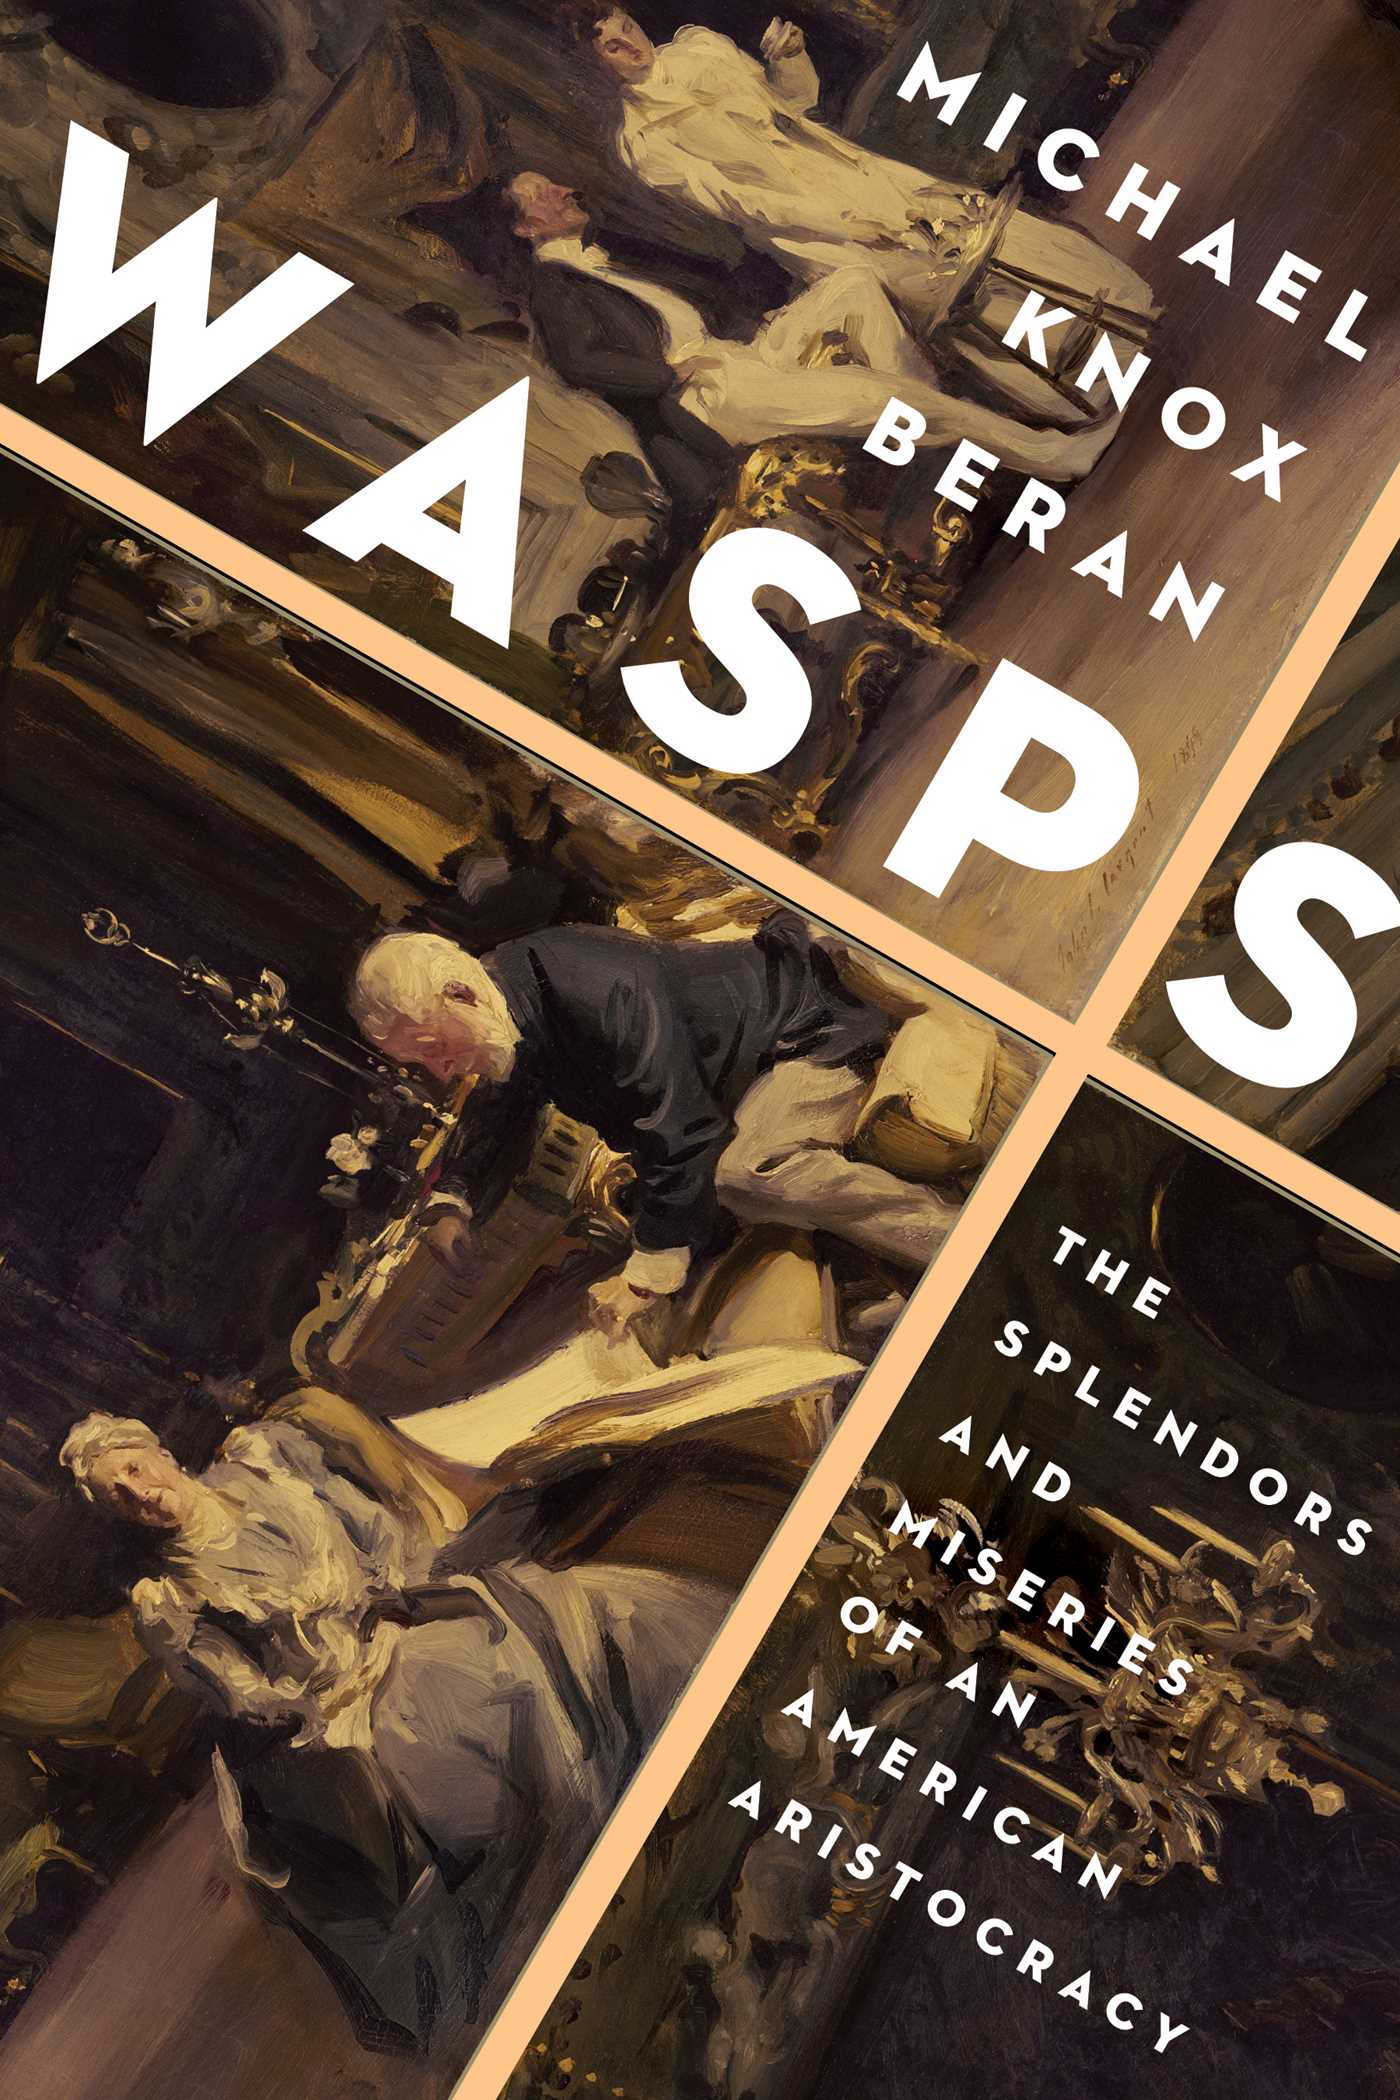 WASPs- The Splendors and Miseries of an American Aristocracy